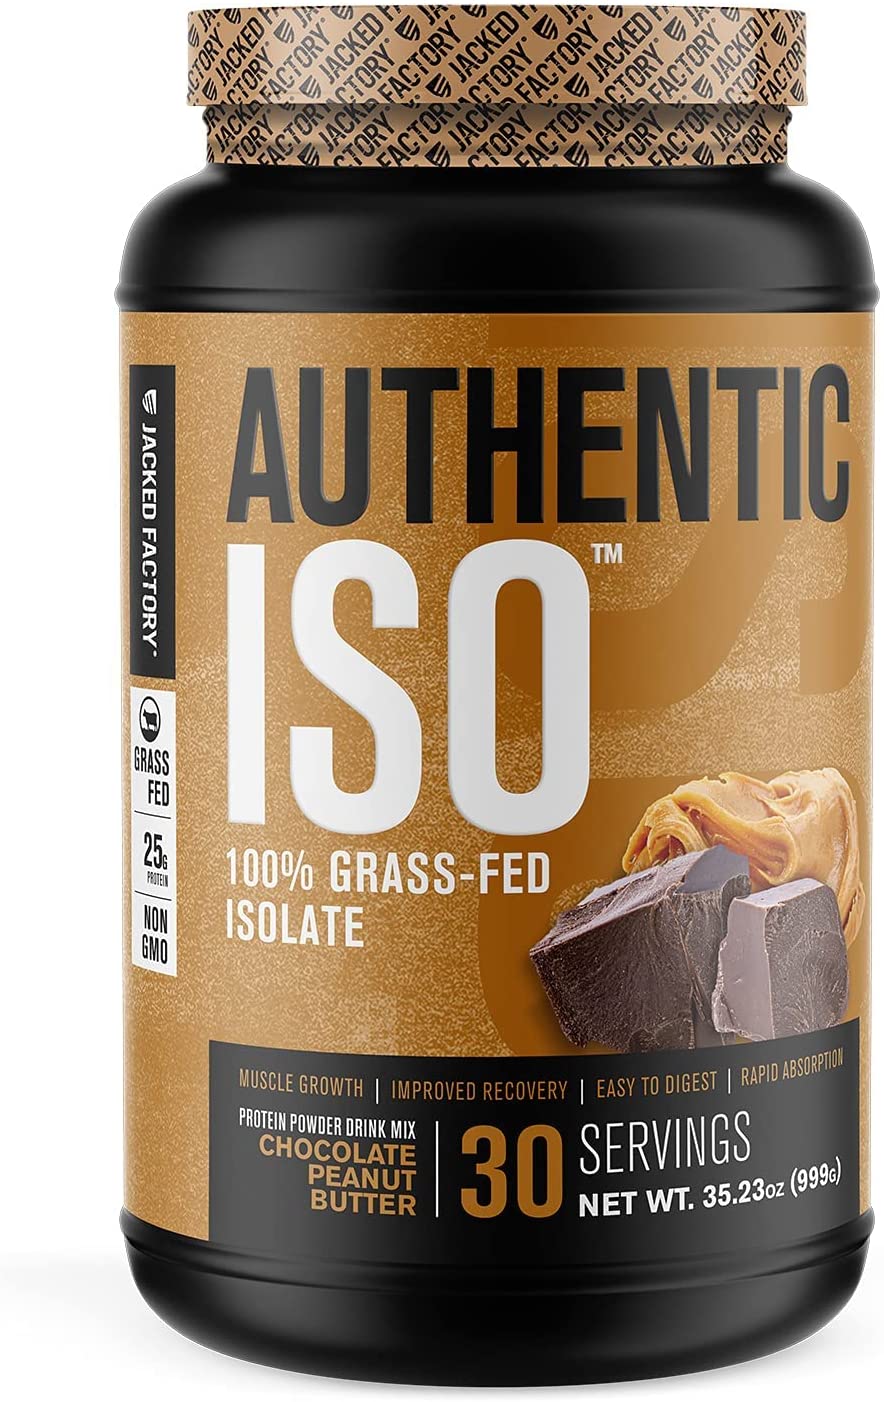 Authentic 100% Grass-Fed Isolate Chocolate Peanut Butter / 30 serving